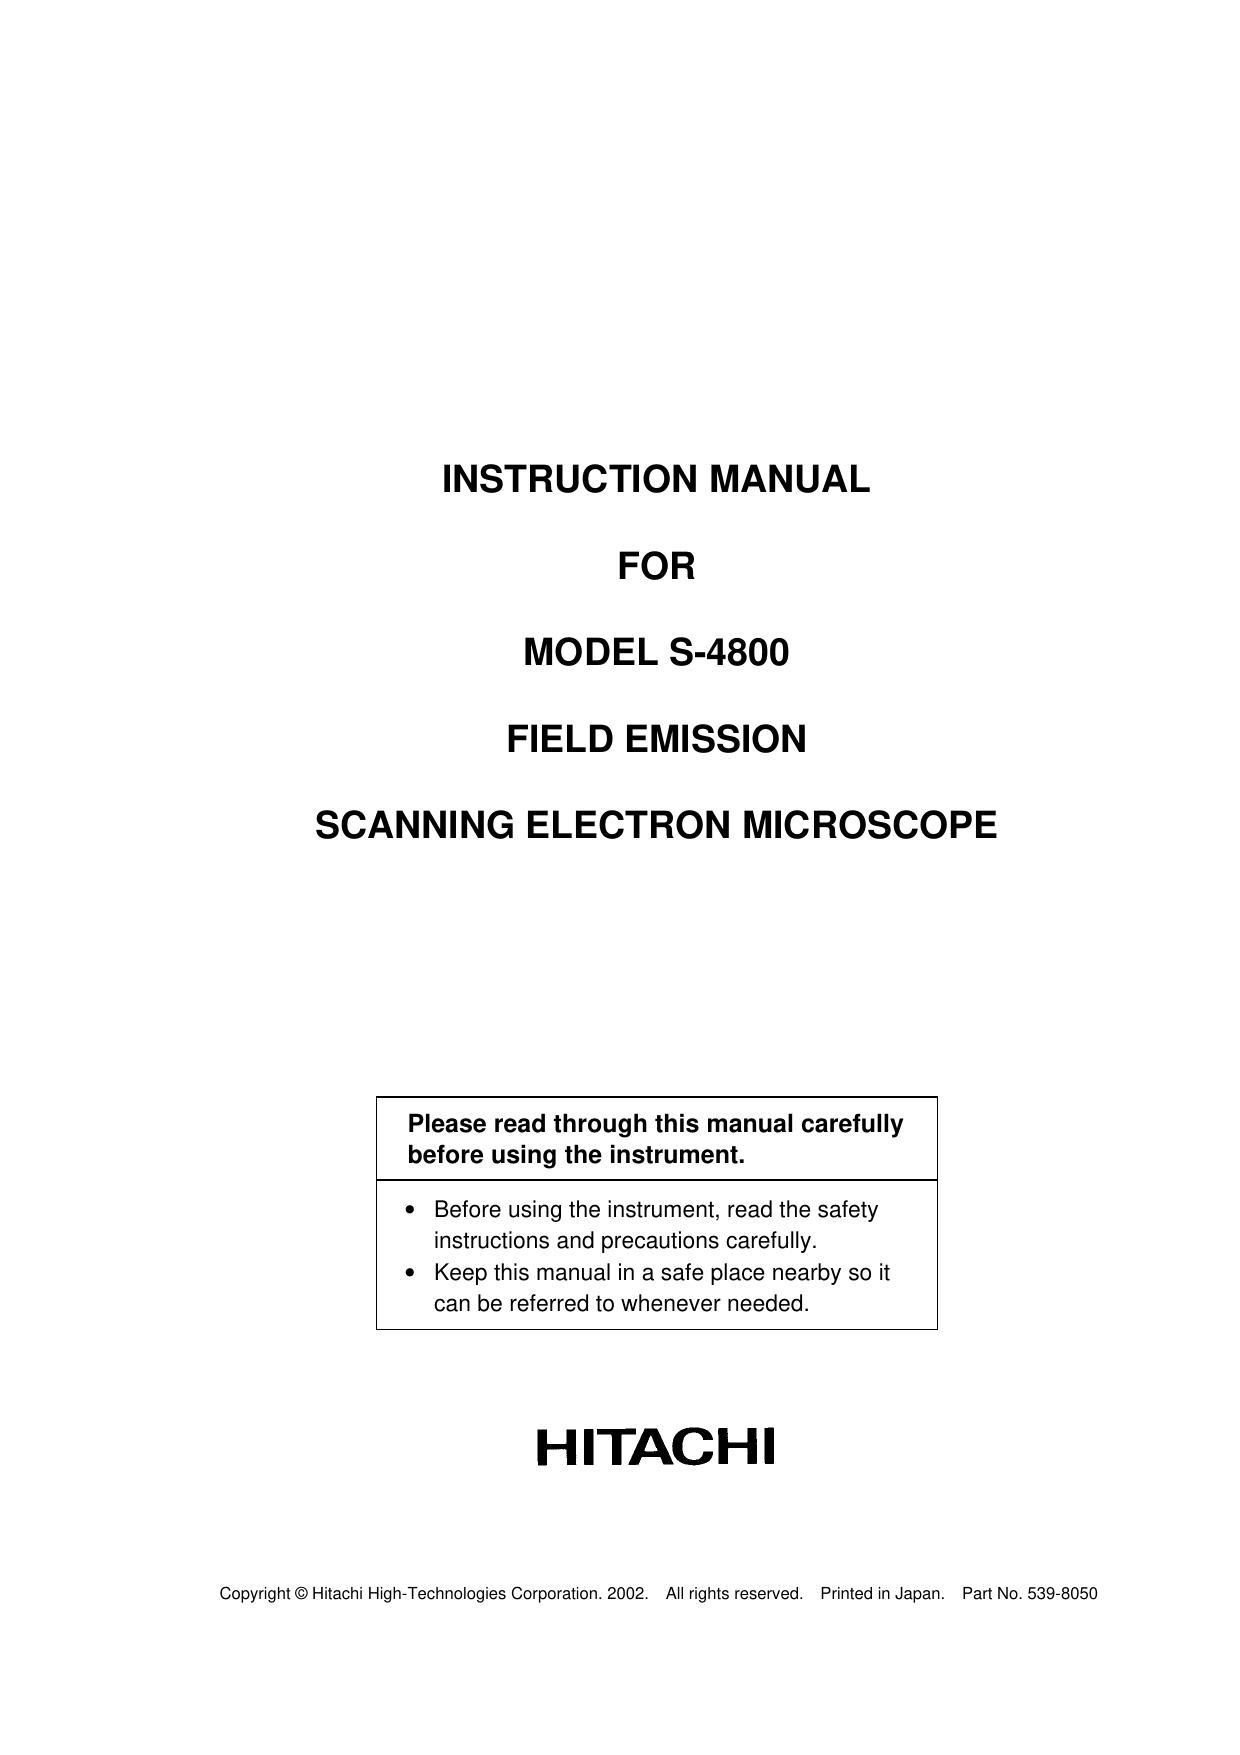 instruction-manual-for-model-s-4800-field-emission-scanning-electron-microscope.pdf